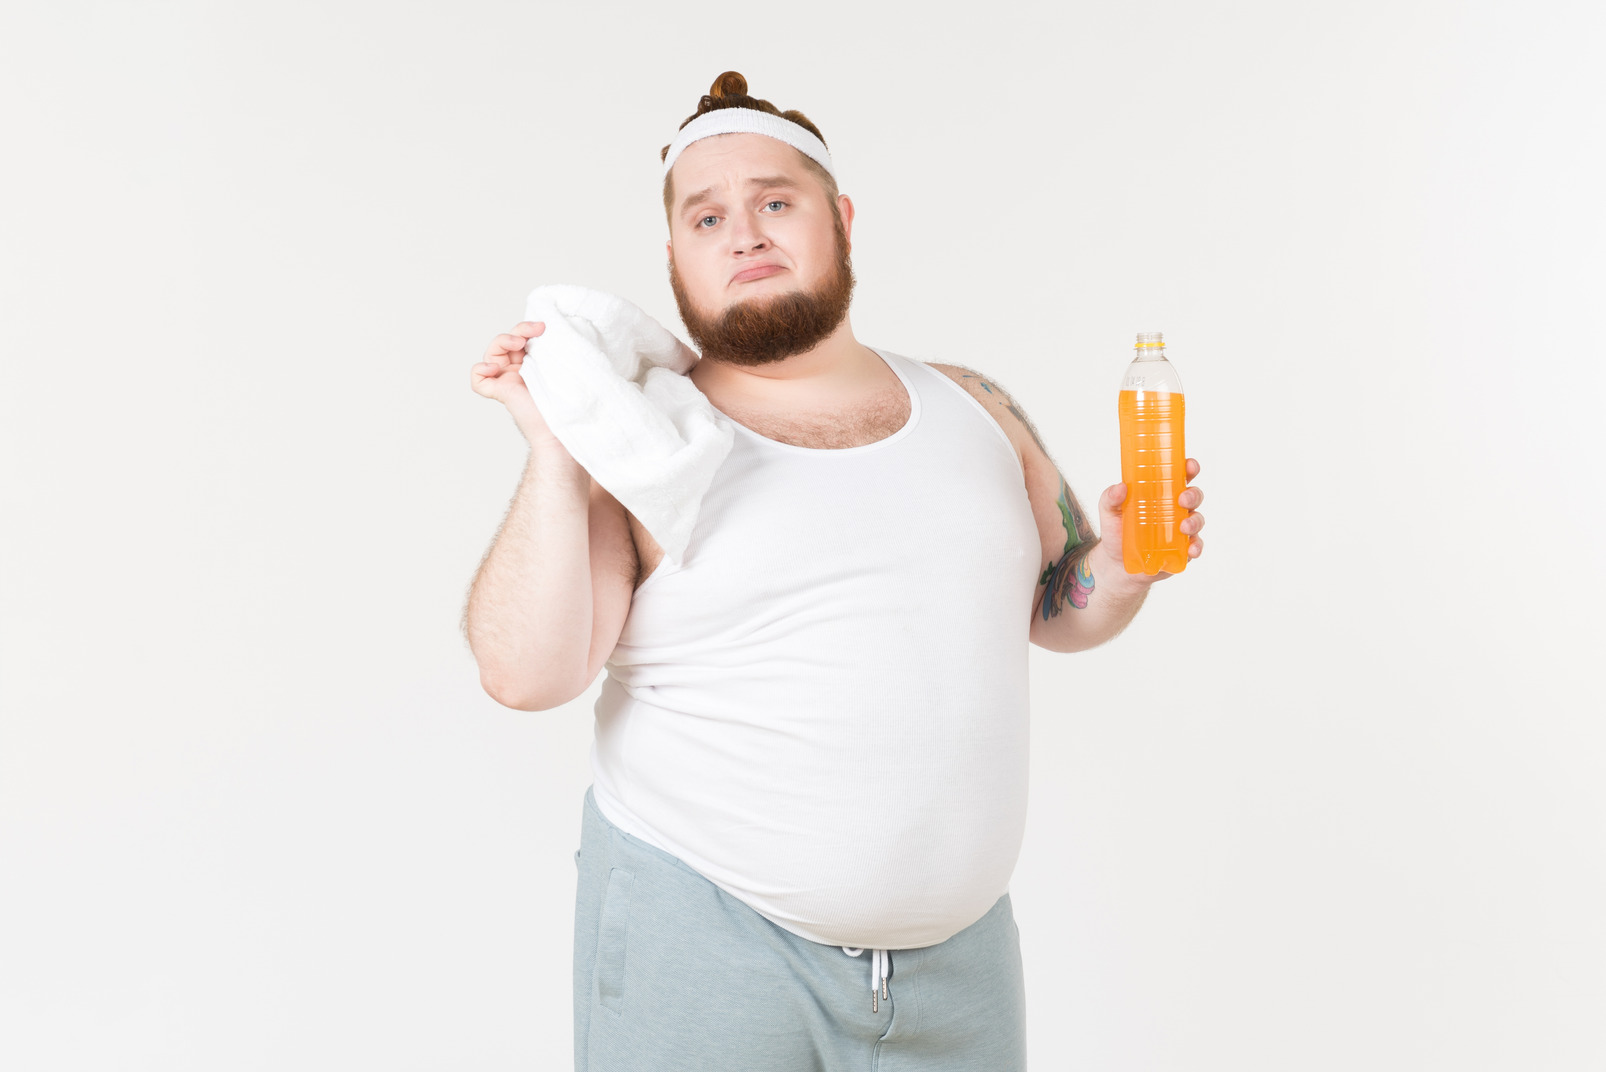 A disappointed fat man in sportswear holding bottle of soft drink and a towel